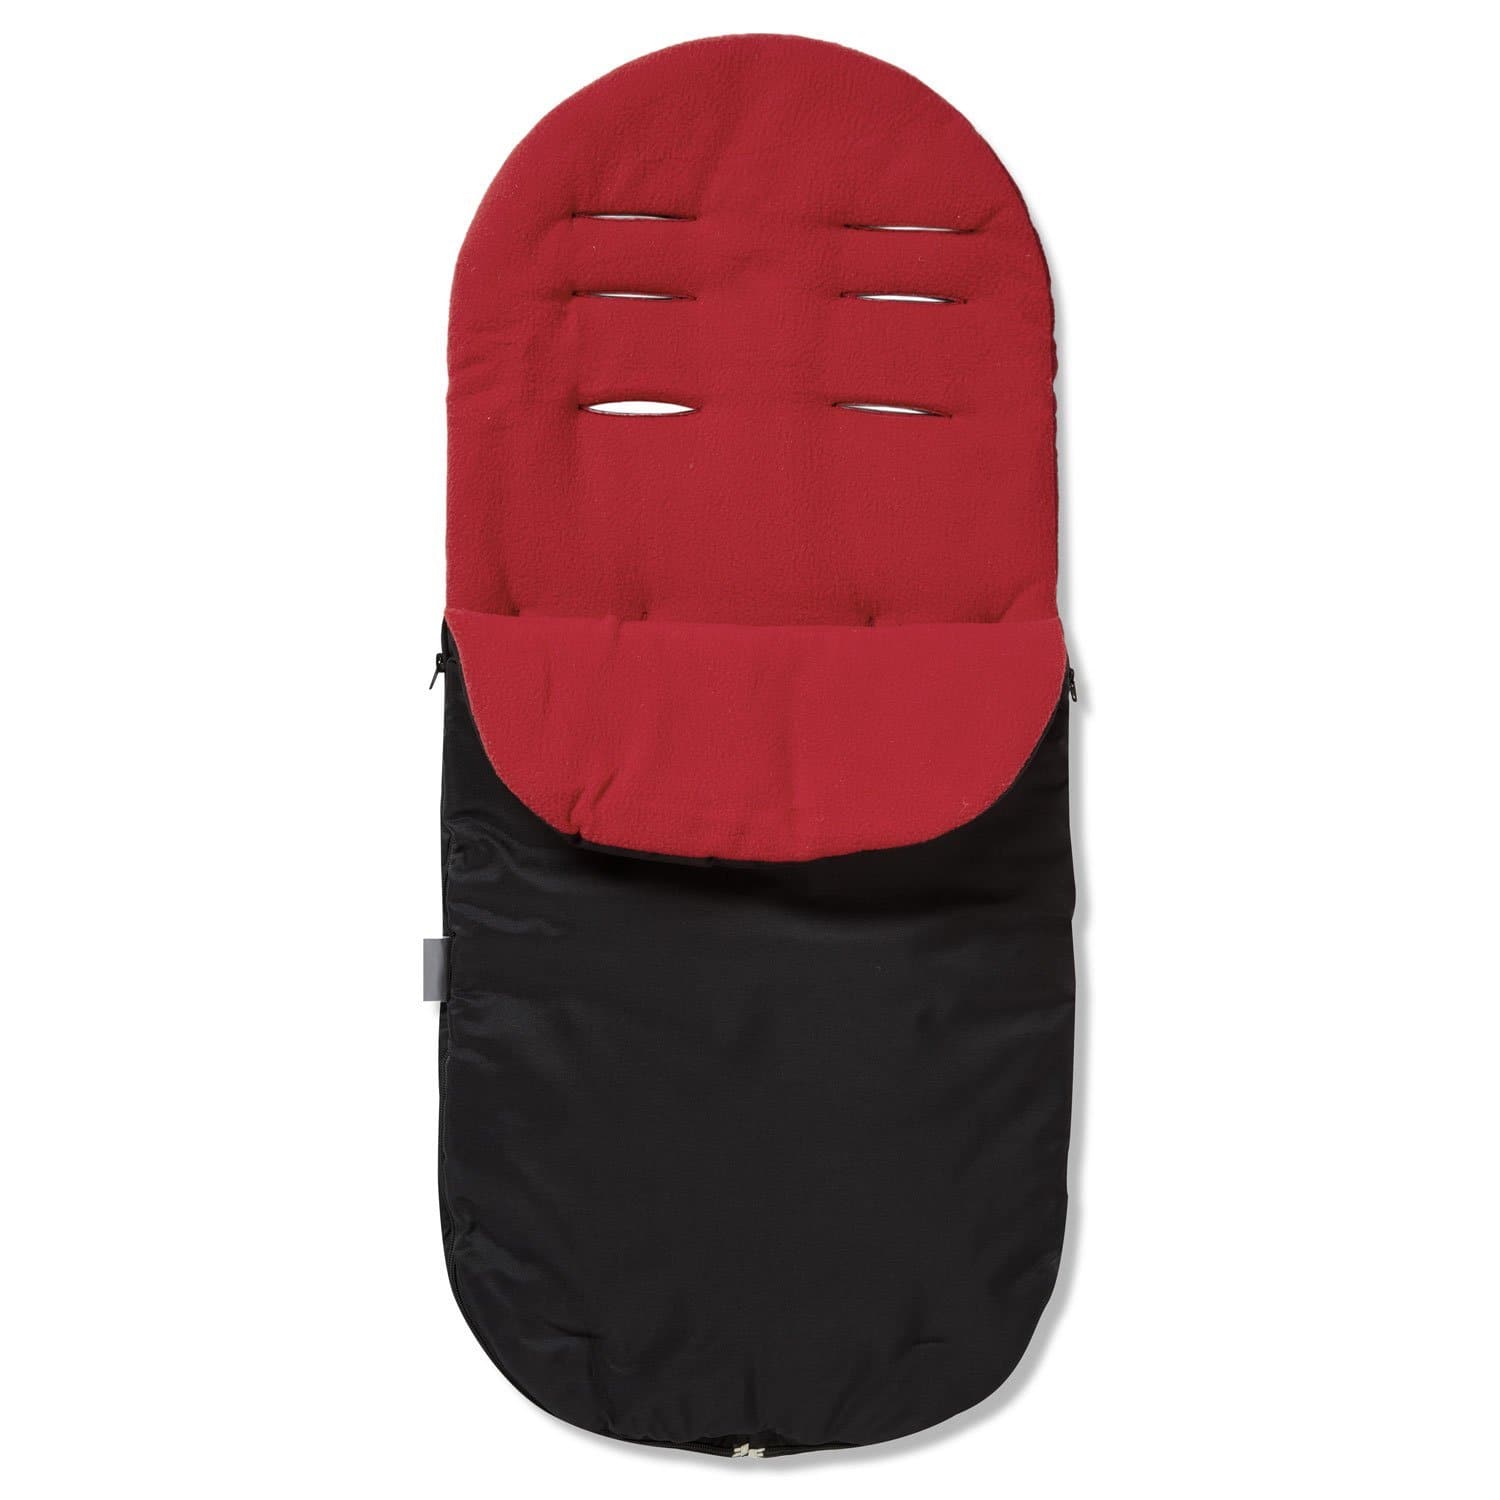 Footmuff / Cosy Toes Compatible with Brio - Red / Fits All Models | For Your Little One